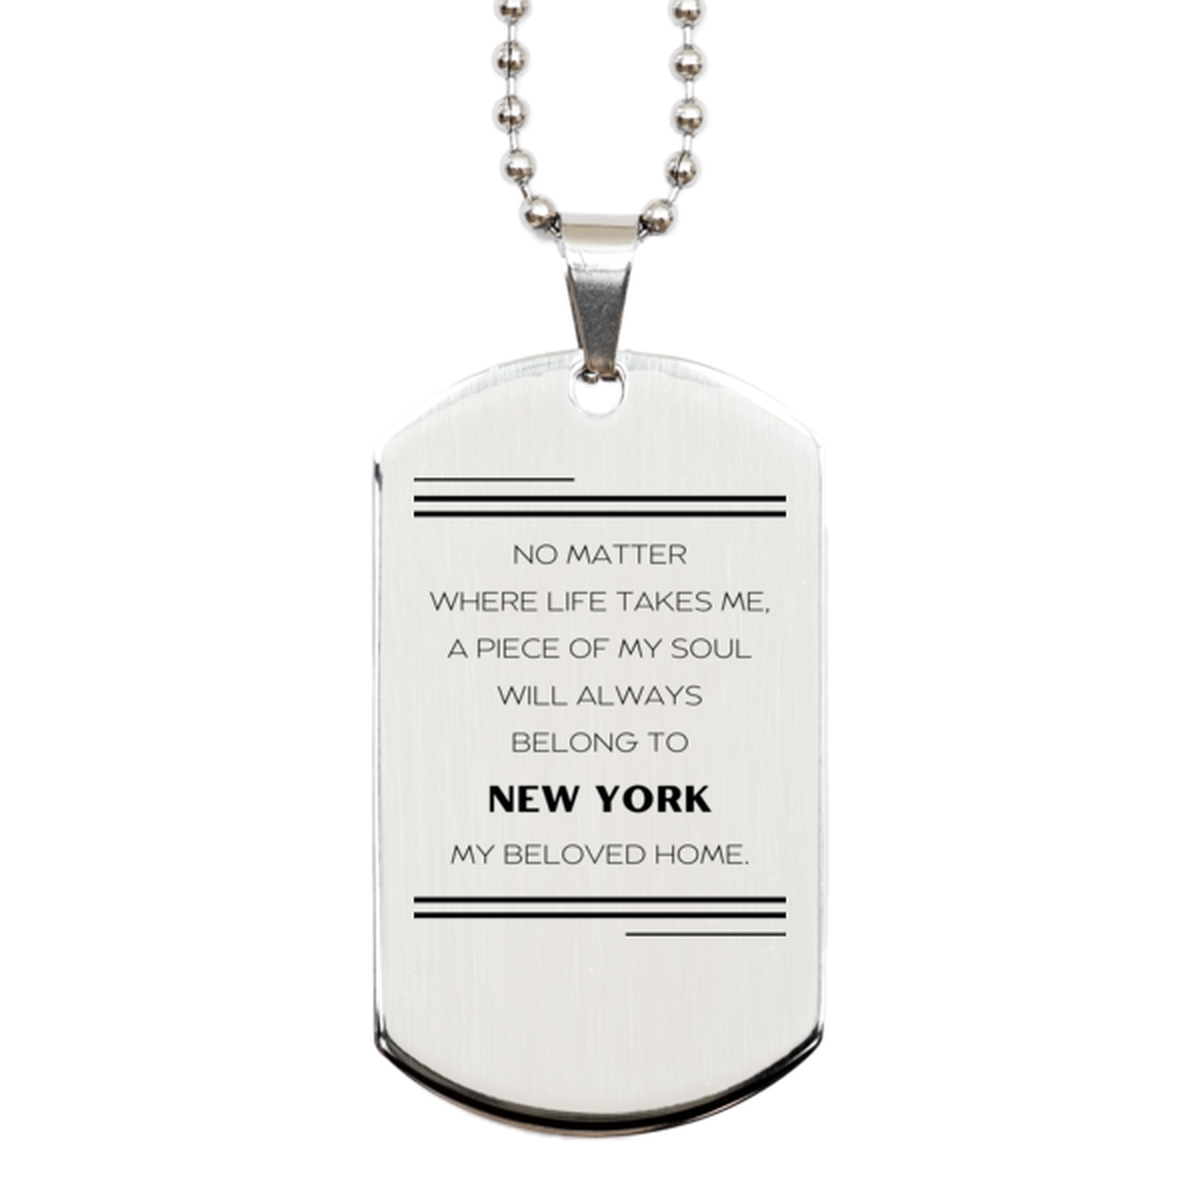 Love New York State Gifts, My soul will always belong to New York, Proud Silver Dog Tag, Birthday Unique Gifts For New York Men, Women, Friends